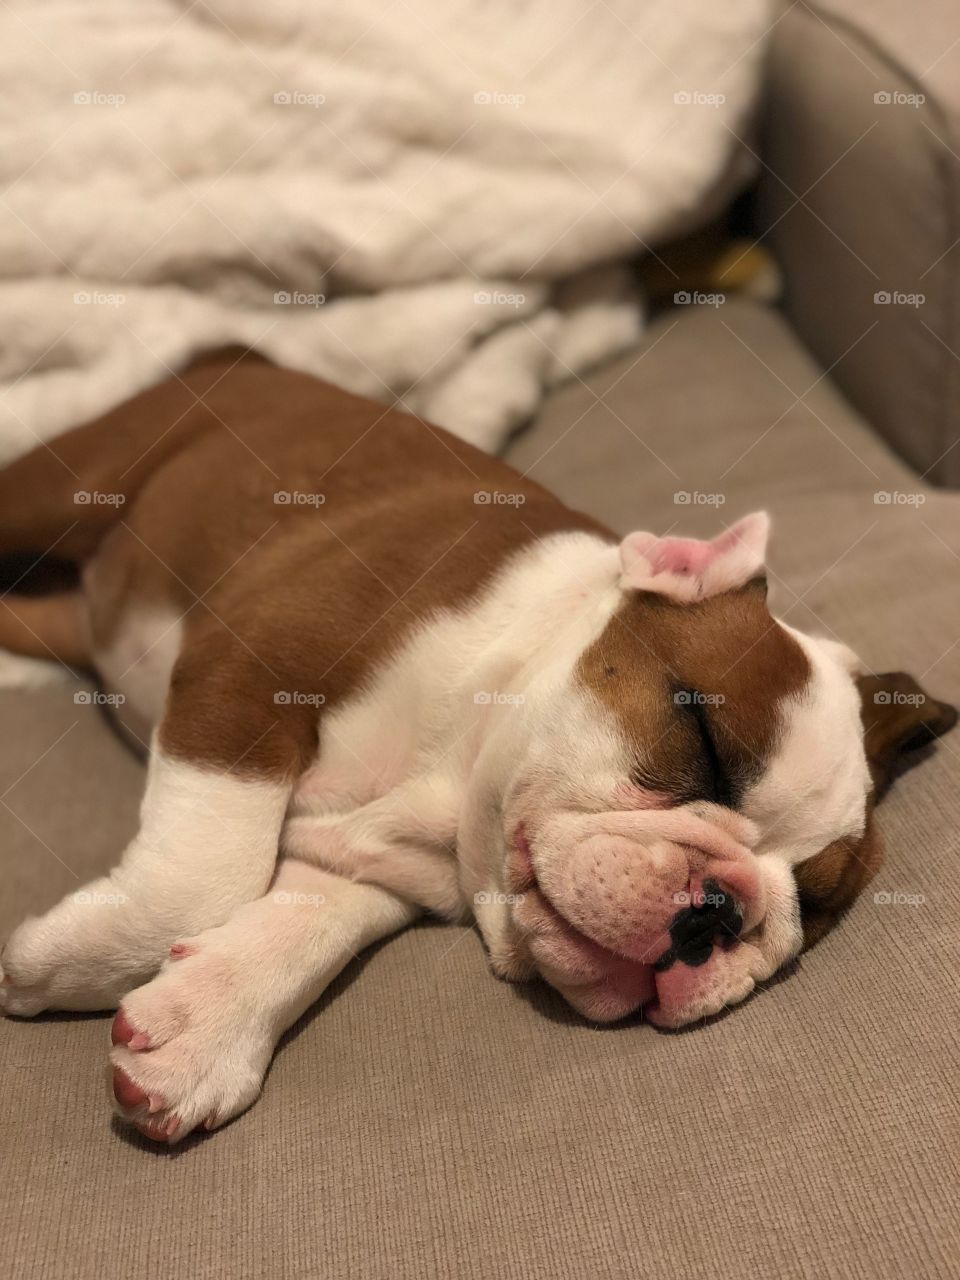 Sweet dreams knocked out puppy